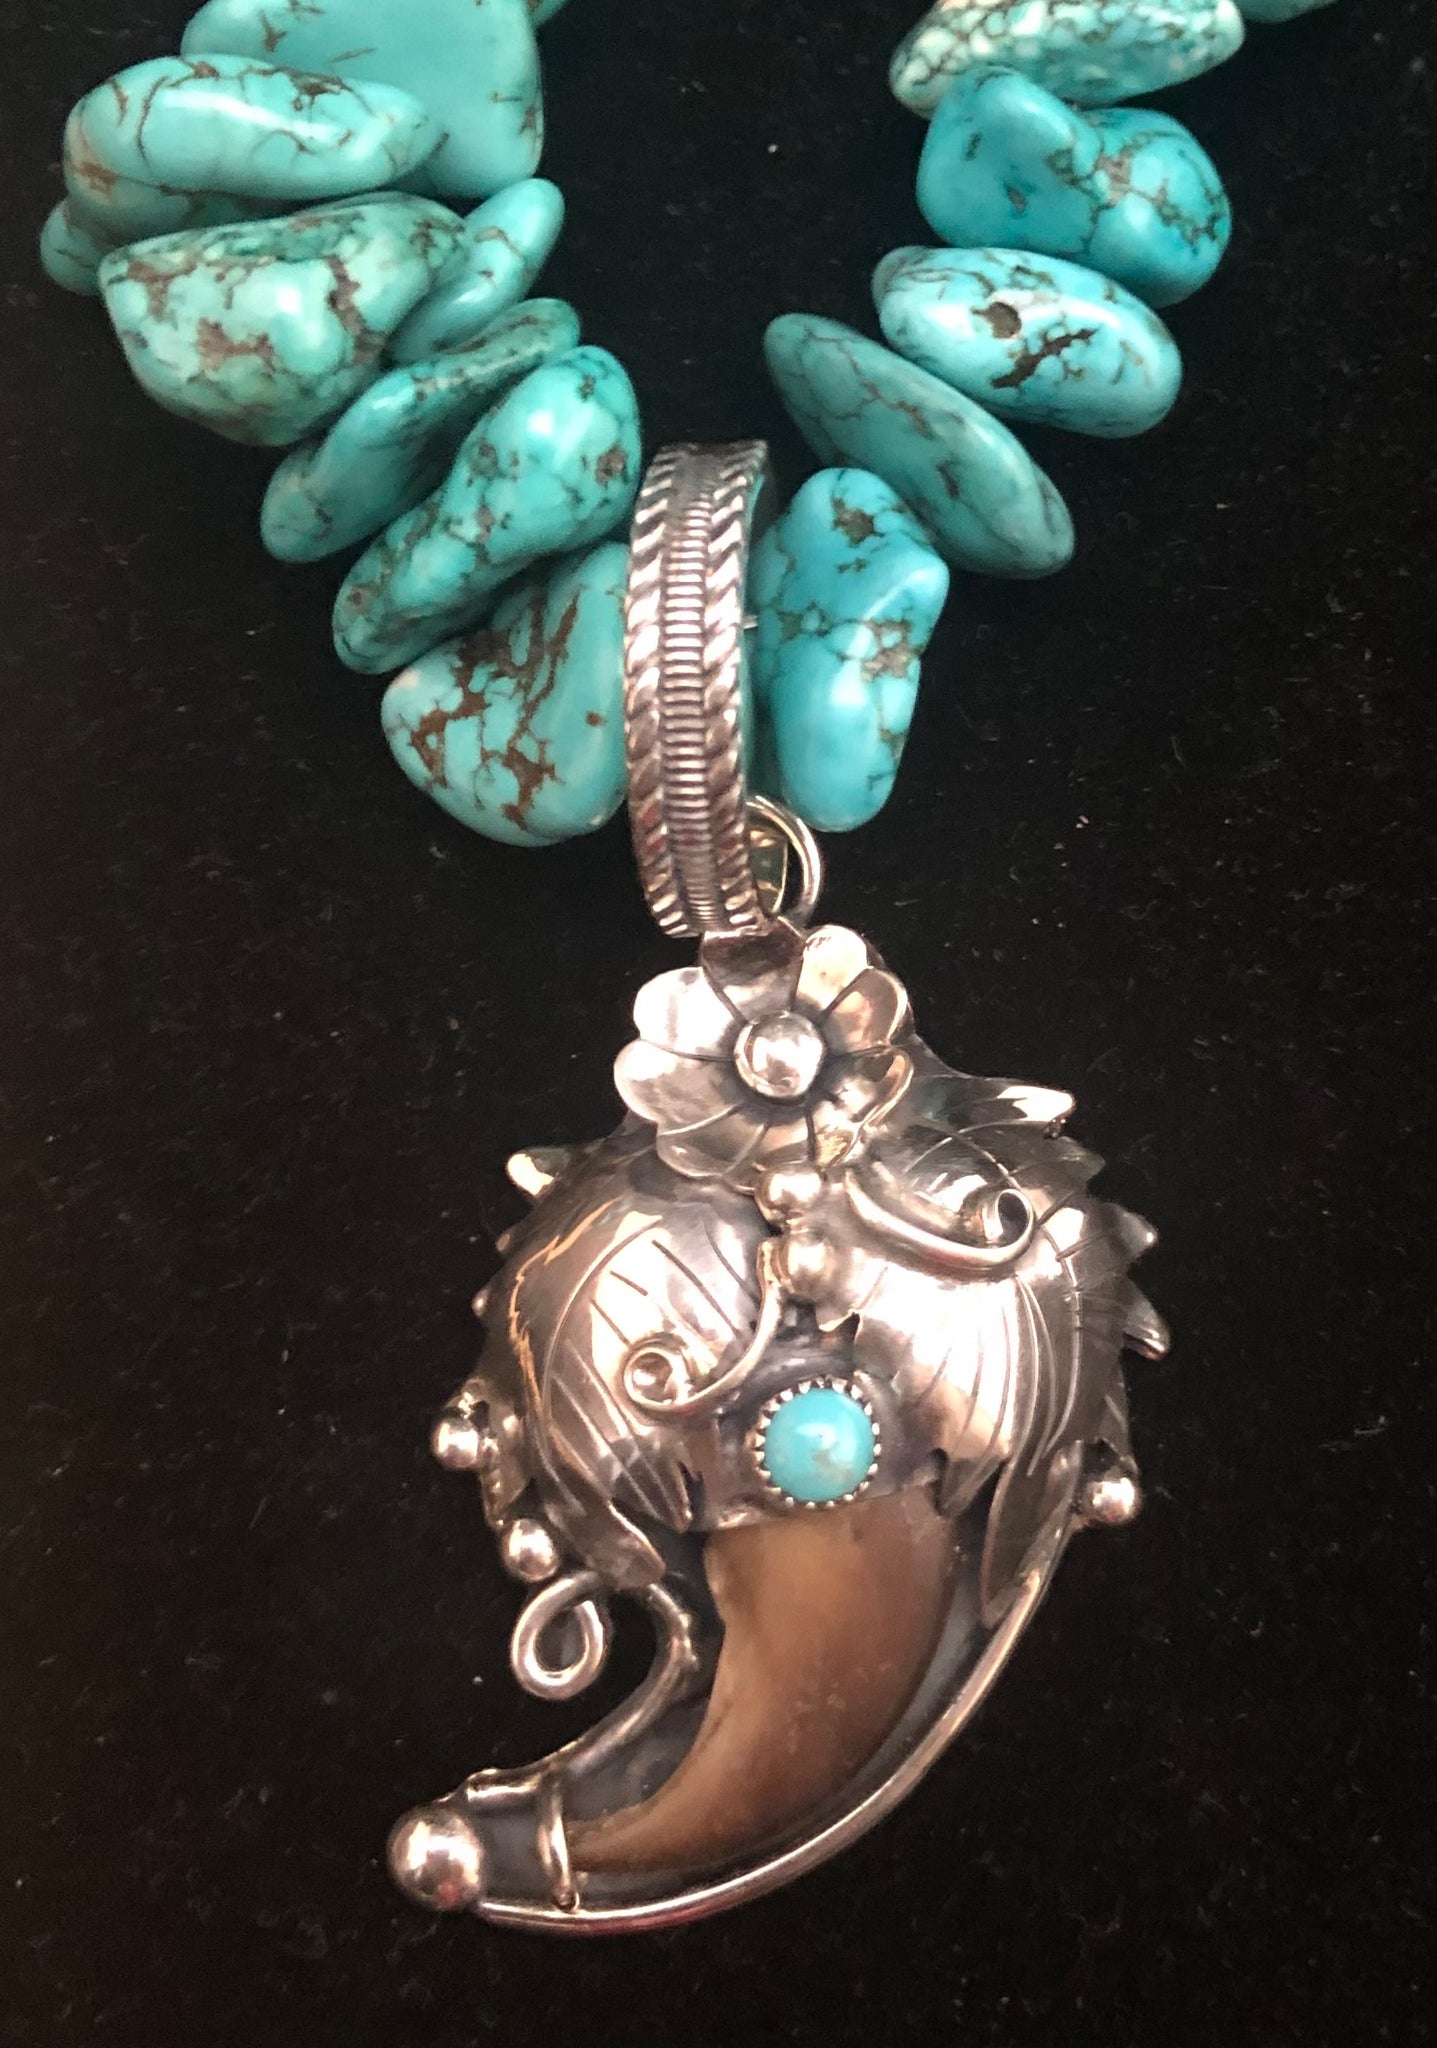 Native American Indian Silver Turquoise Bear Claw Squash Blossom Necklace